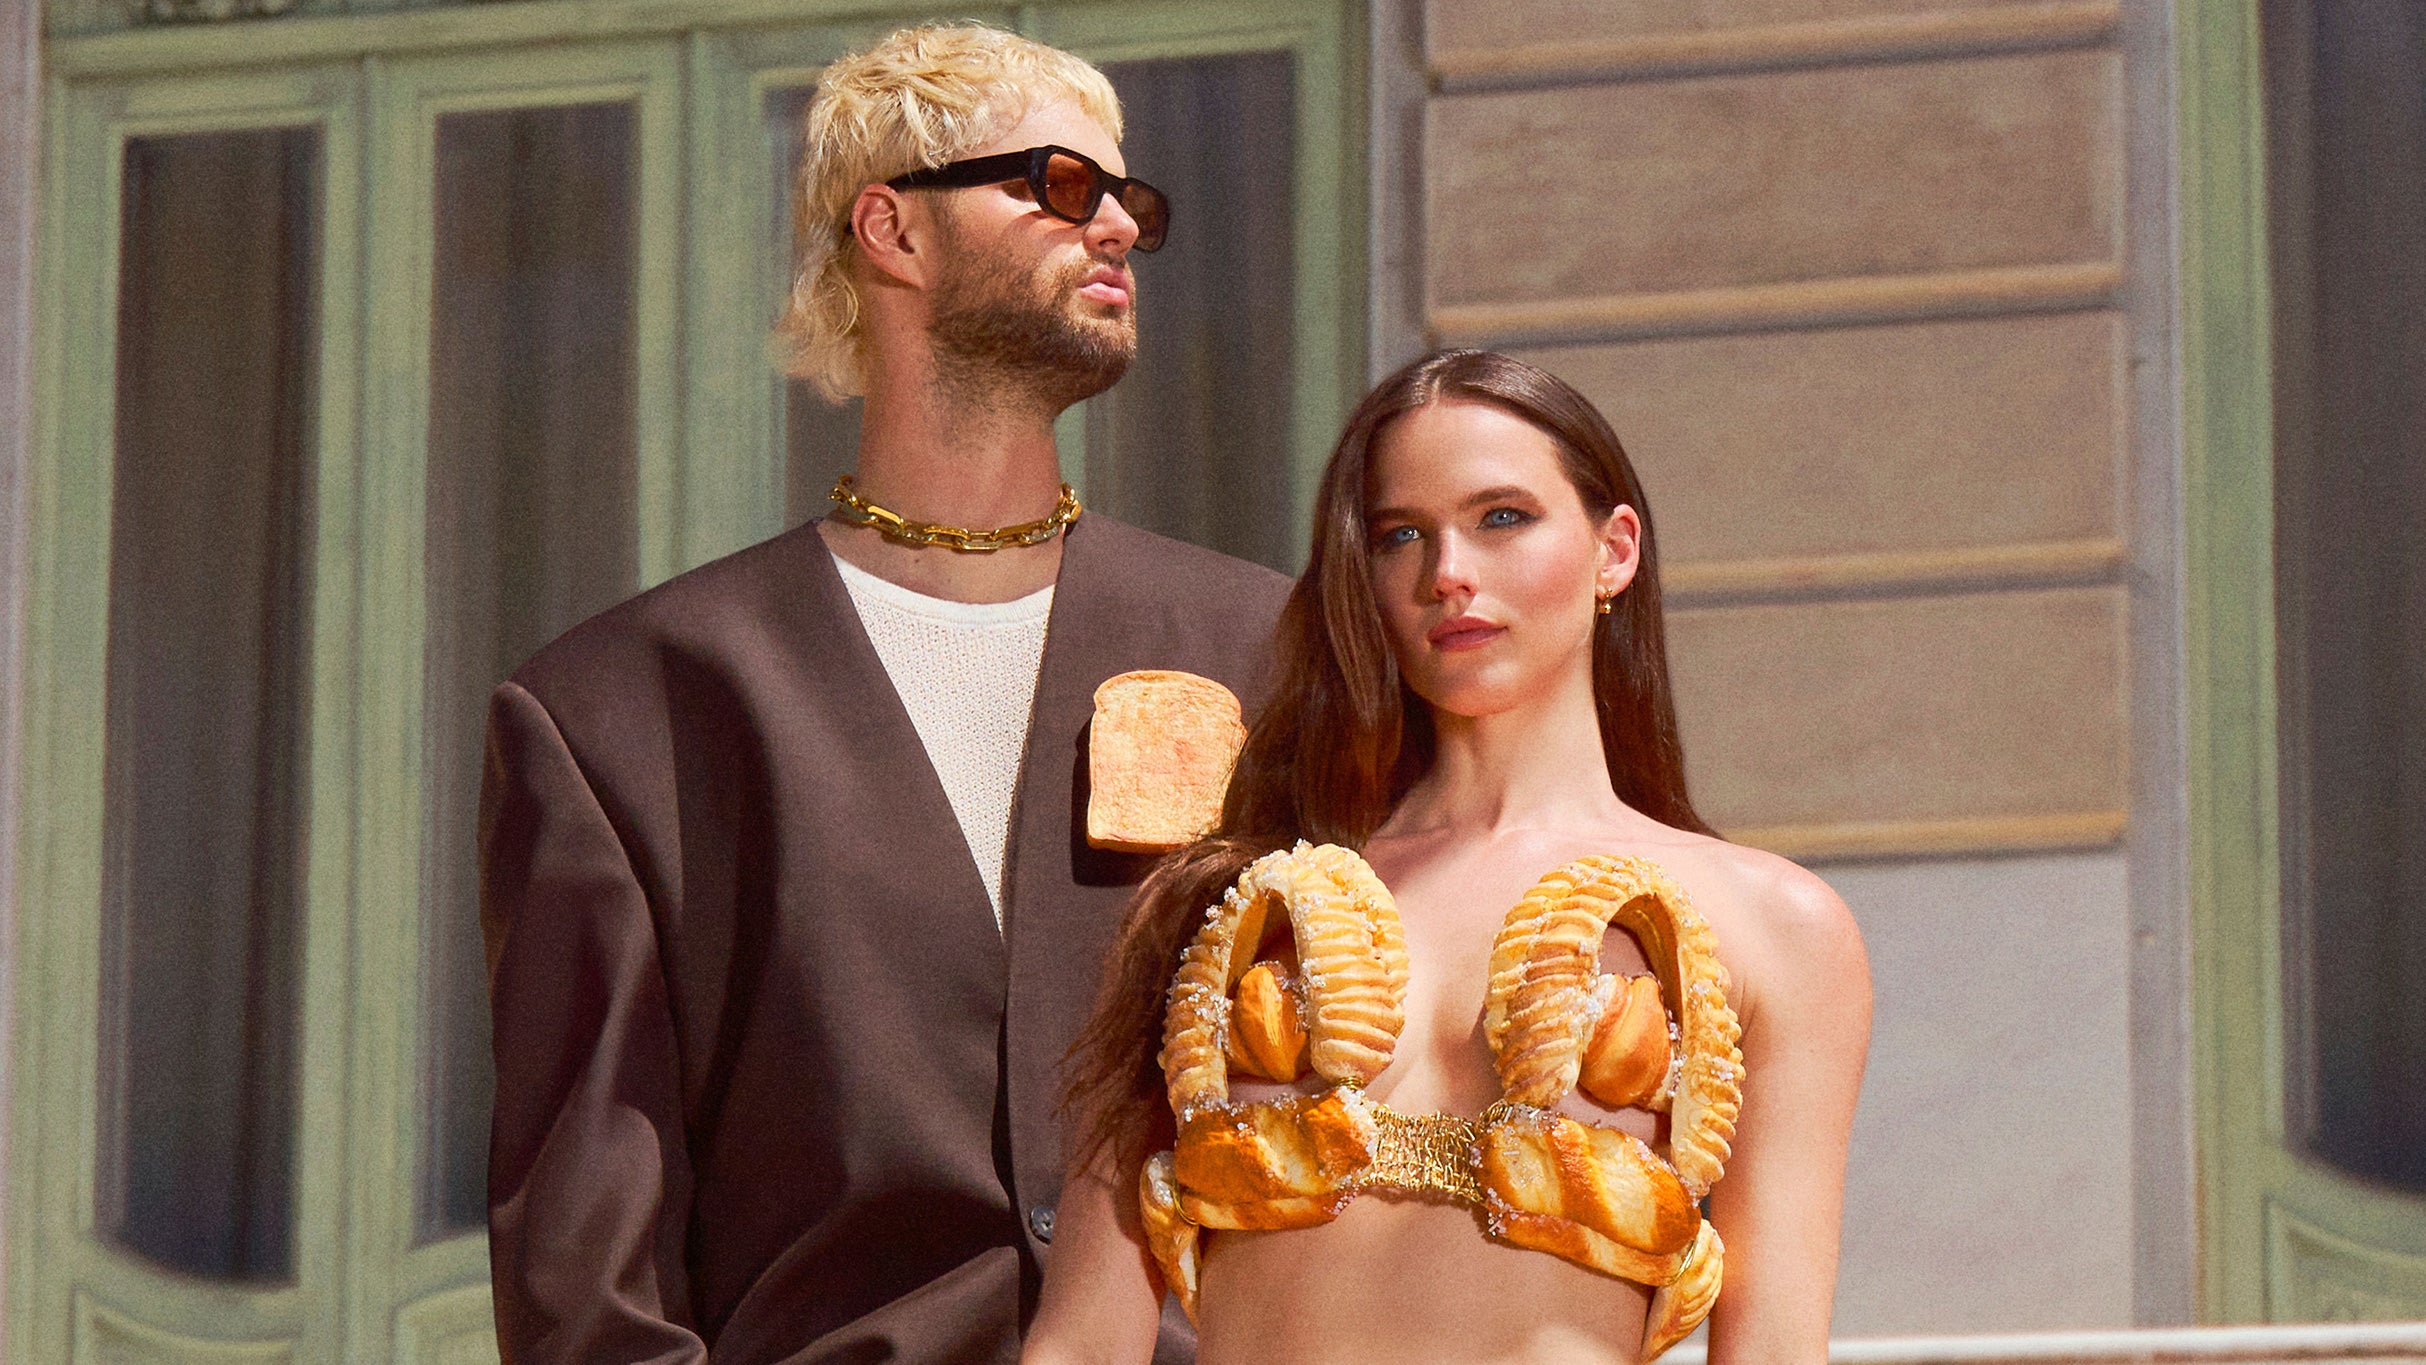 updated presale code for SOFI TUKKER - The BREAD Tour affordable tickets in Dallas at South Side Ballroom